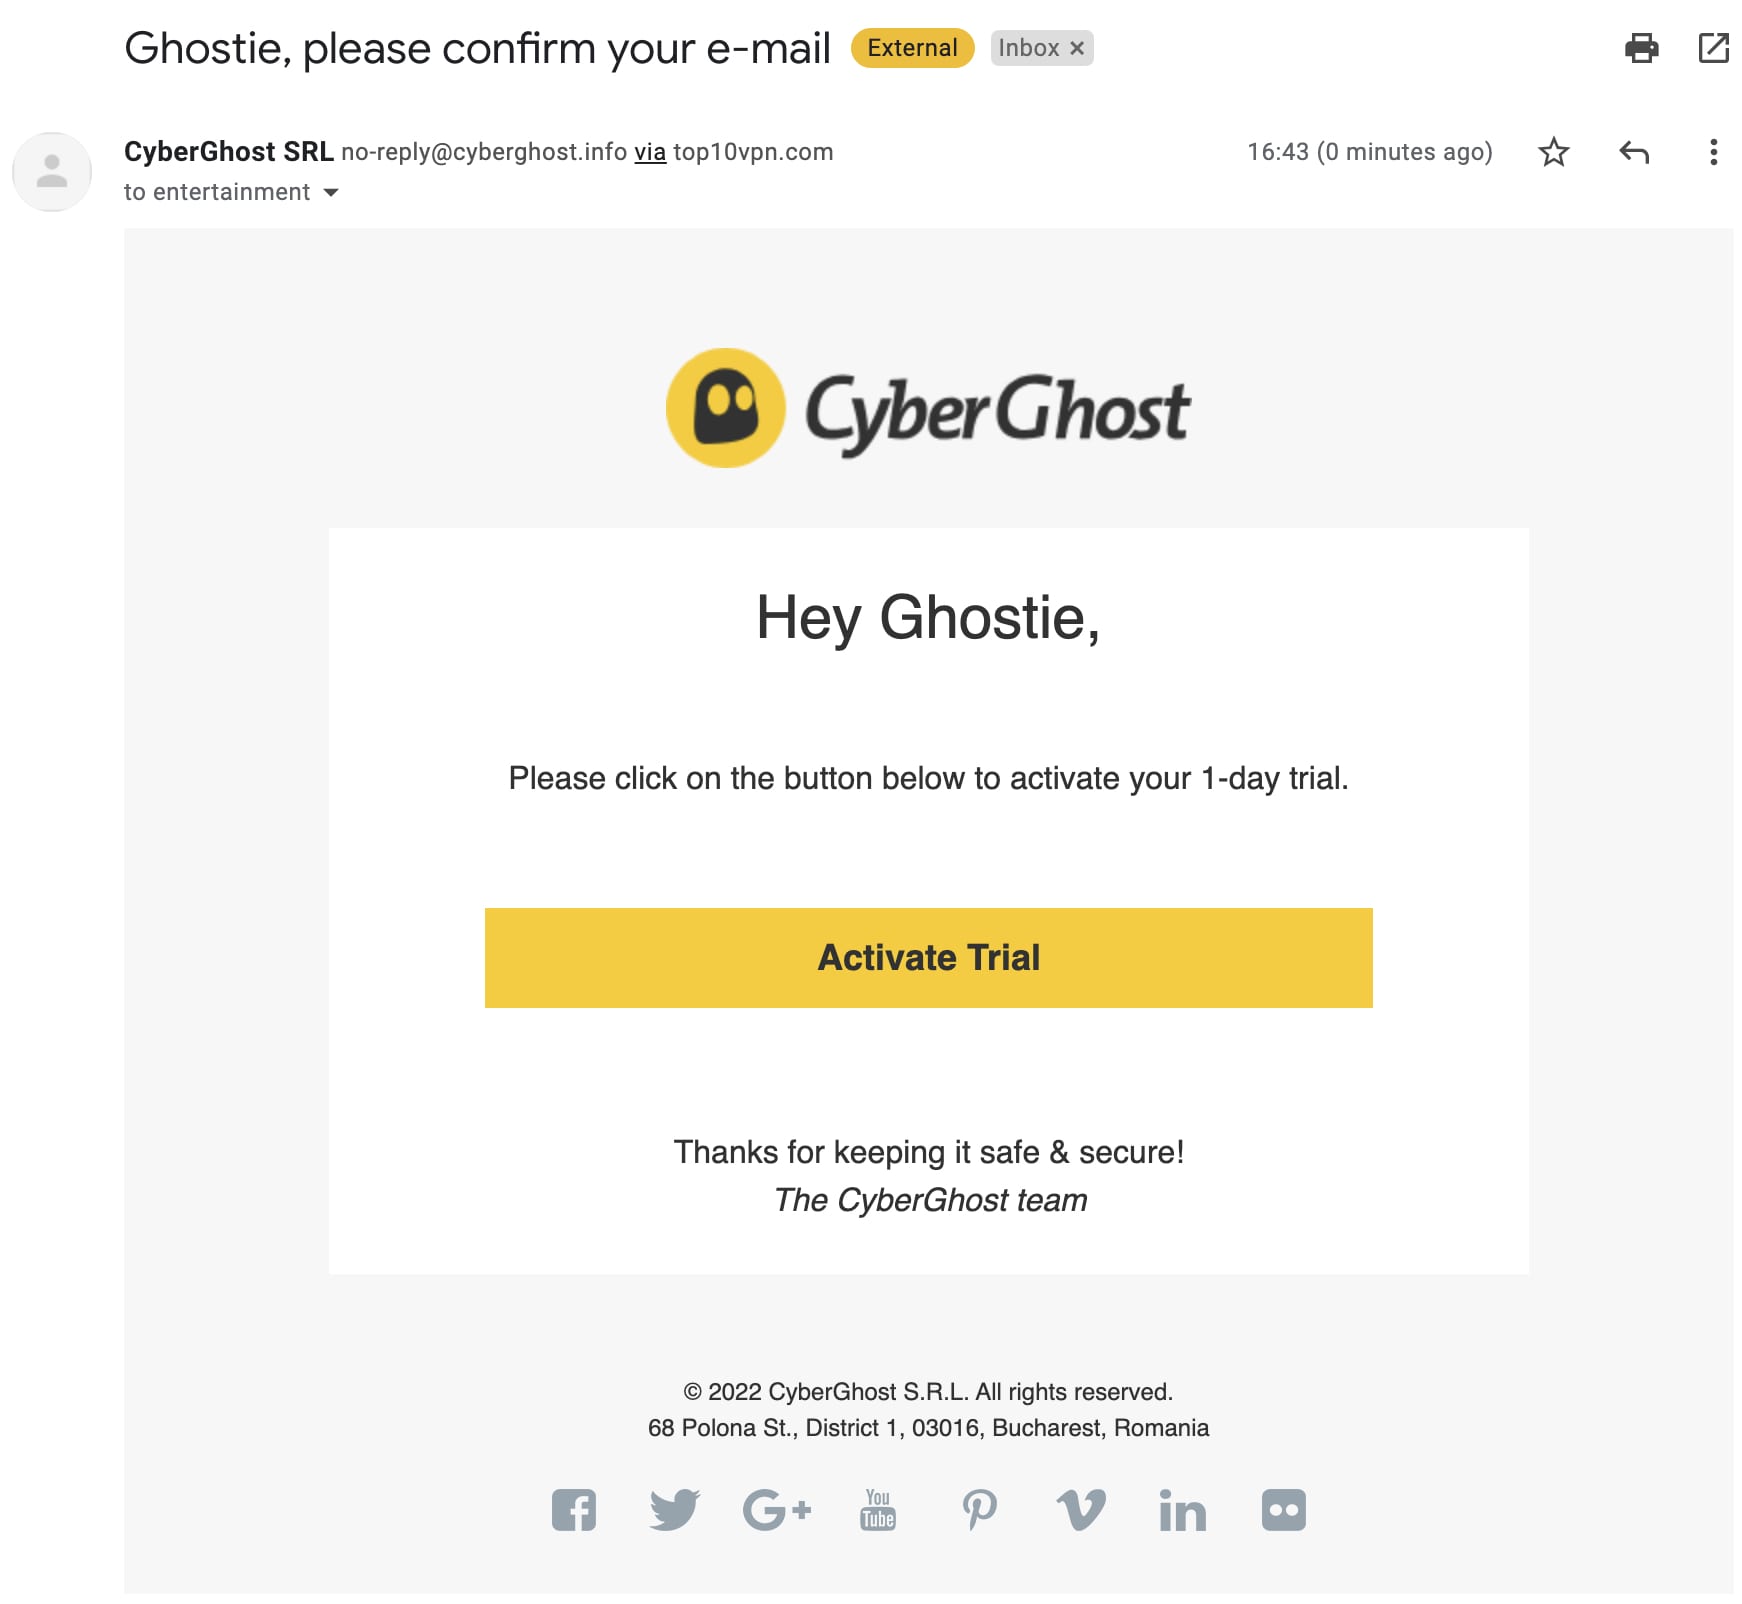 How to Get a CyberGhost Free Trial (No Credit Card Needed)